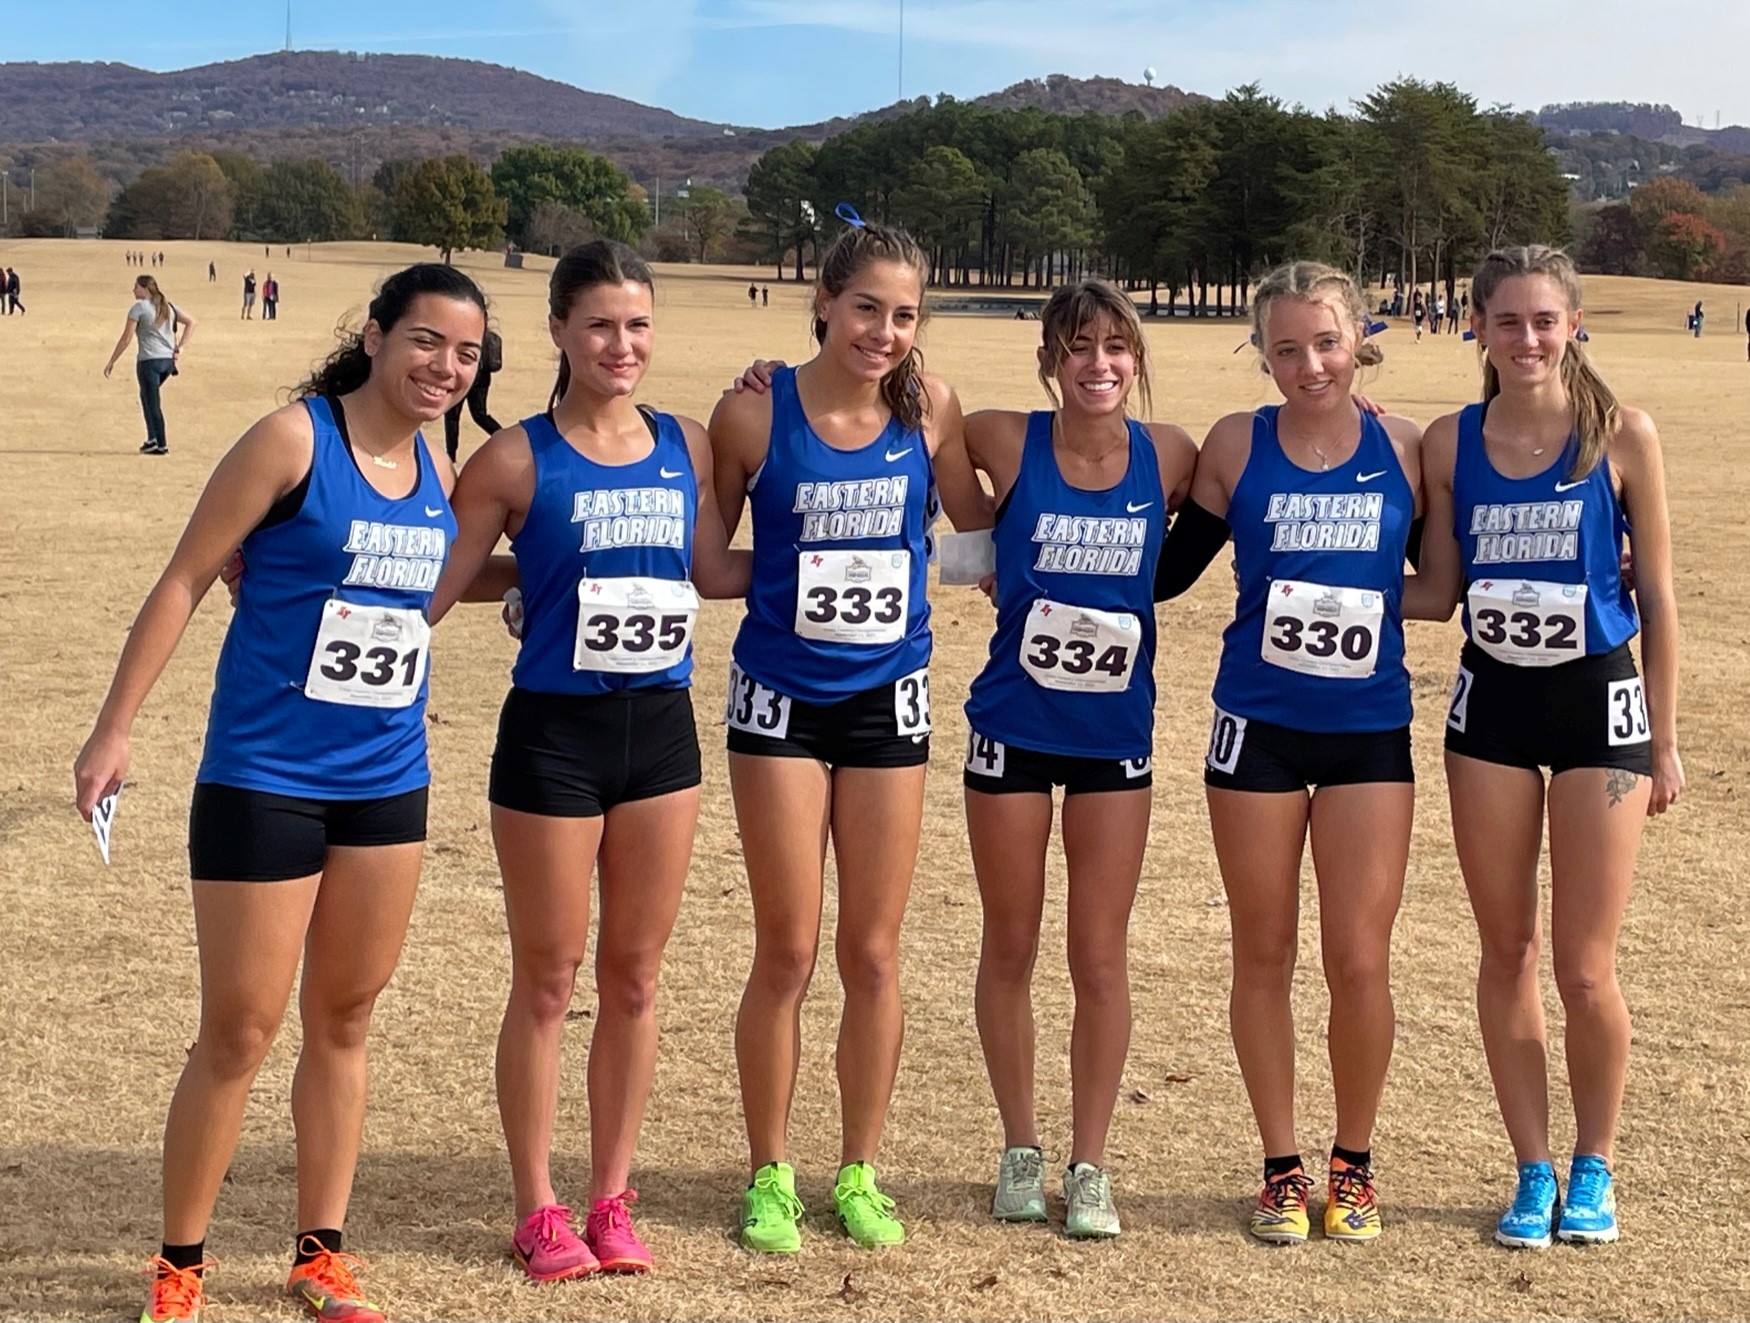 Women's cross country team finishes 15th at NJCAA Division I Cross Country Championships